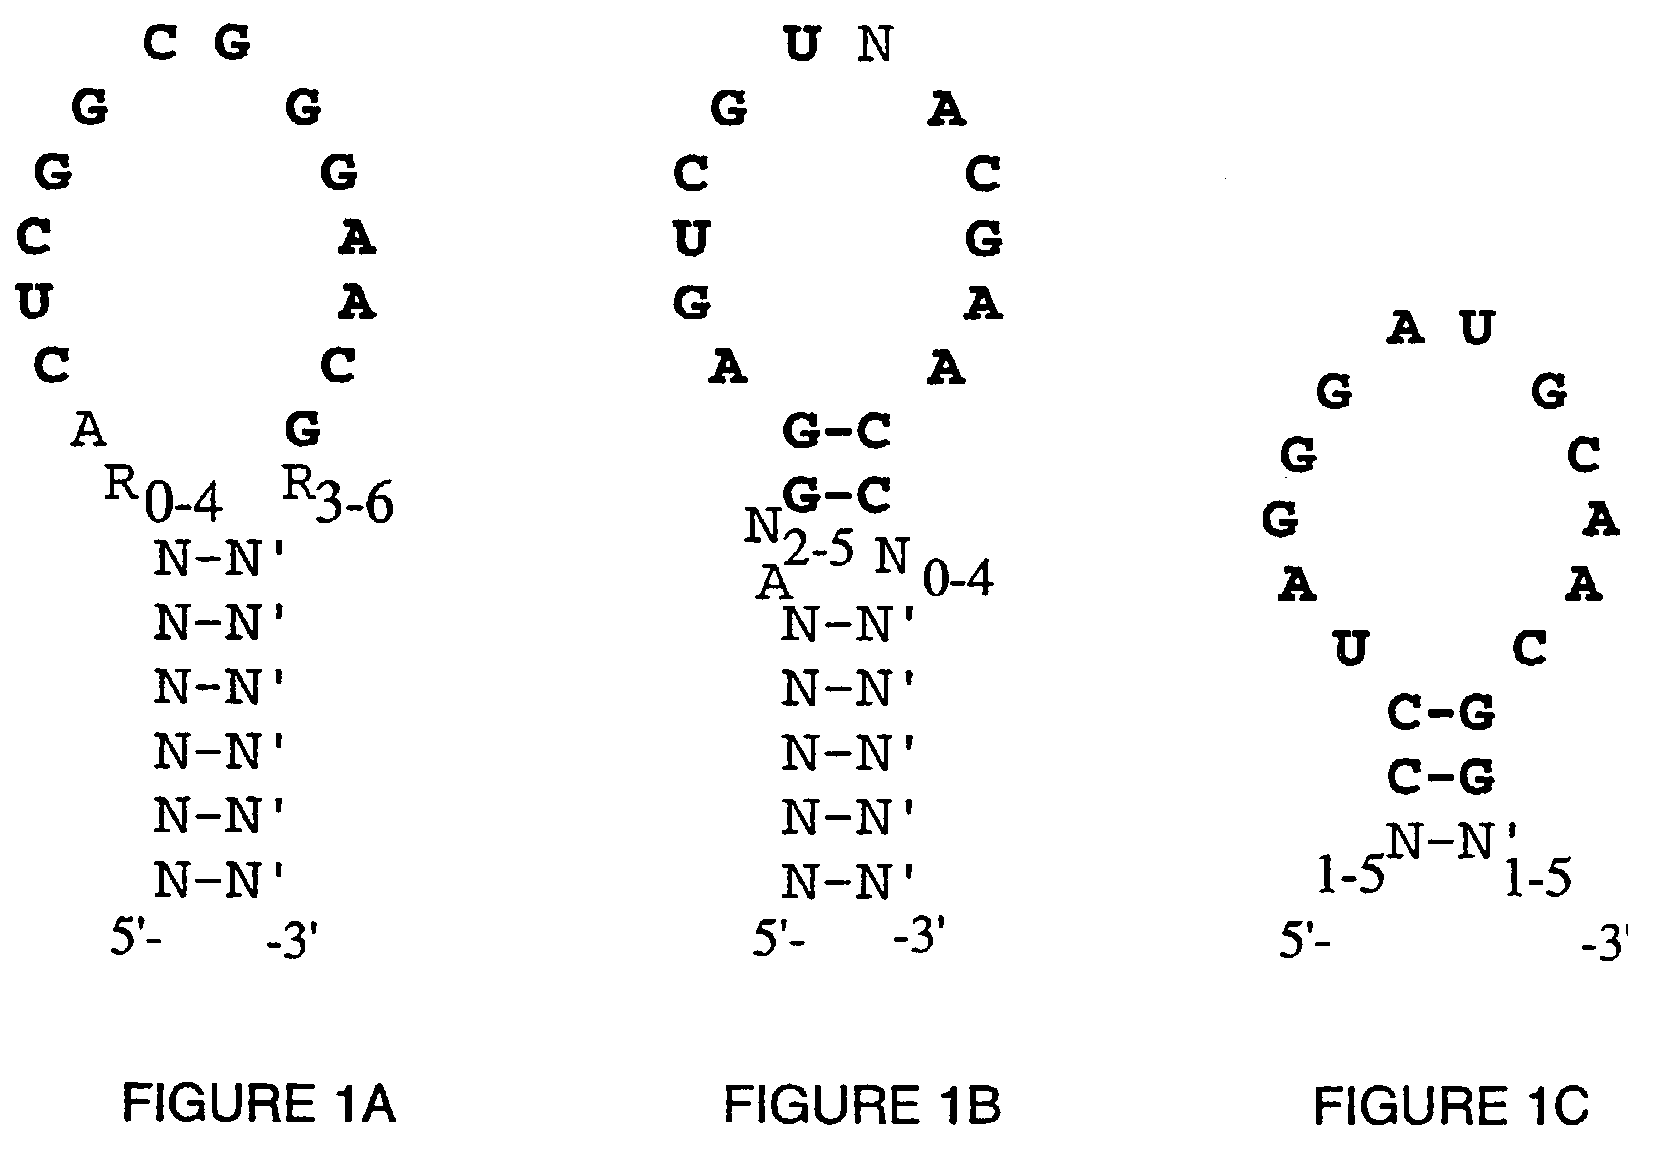 High affinity nucleic acid ligands to lectins